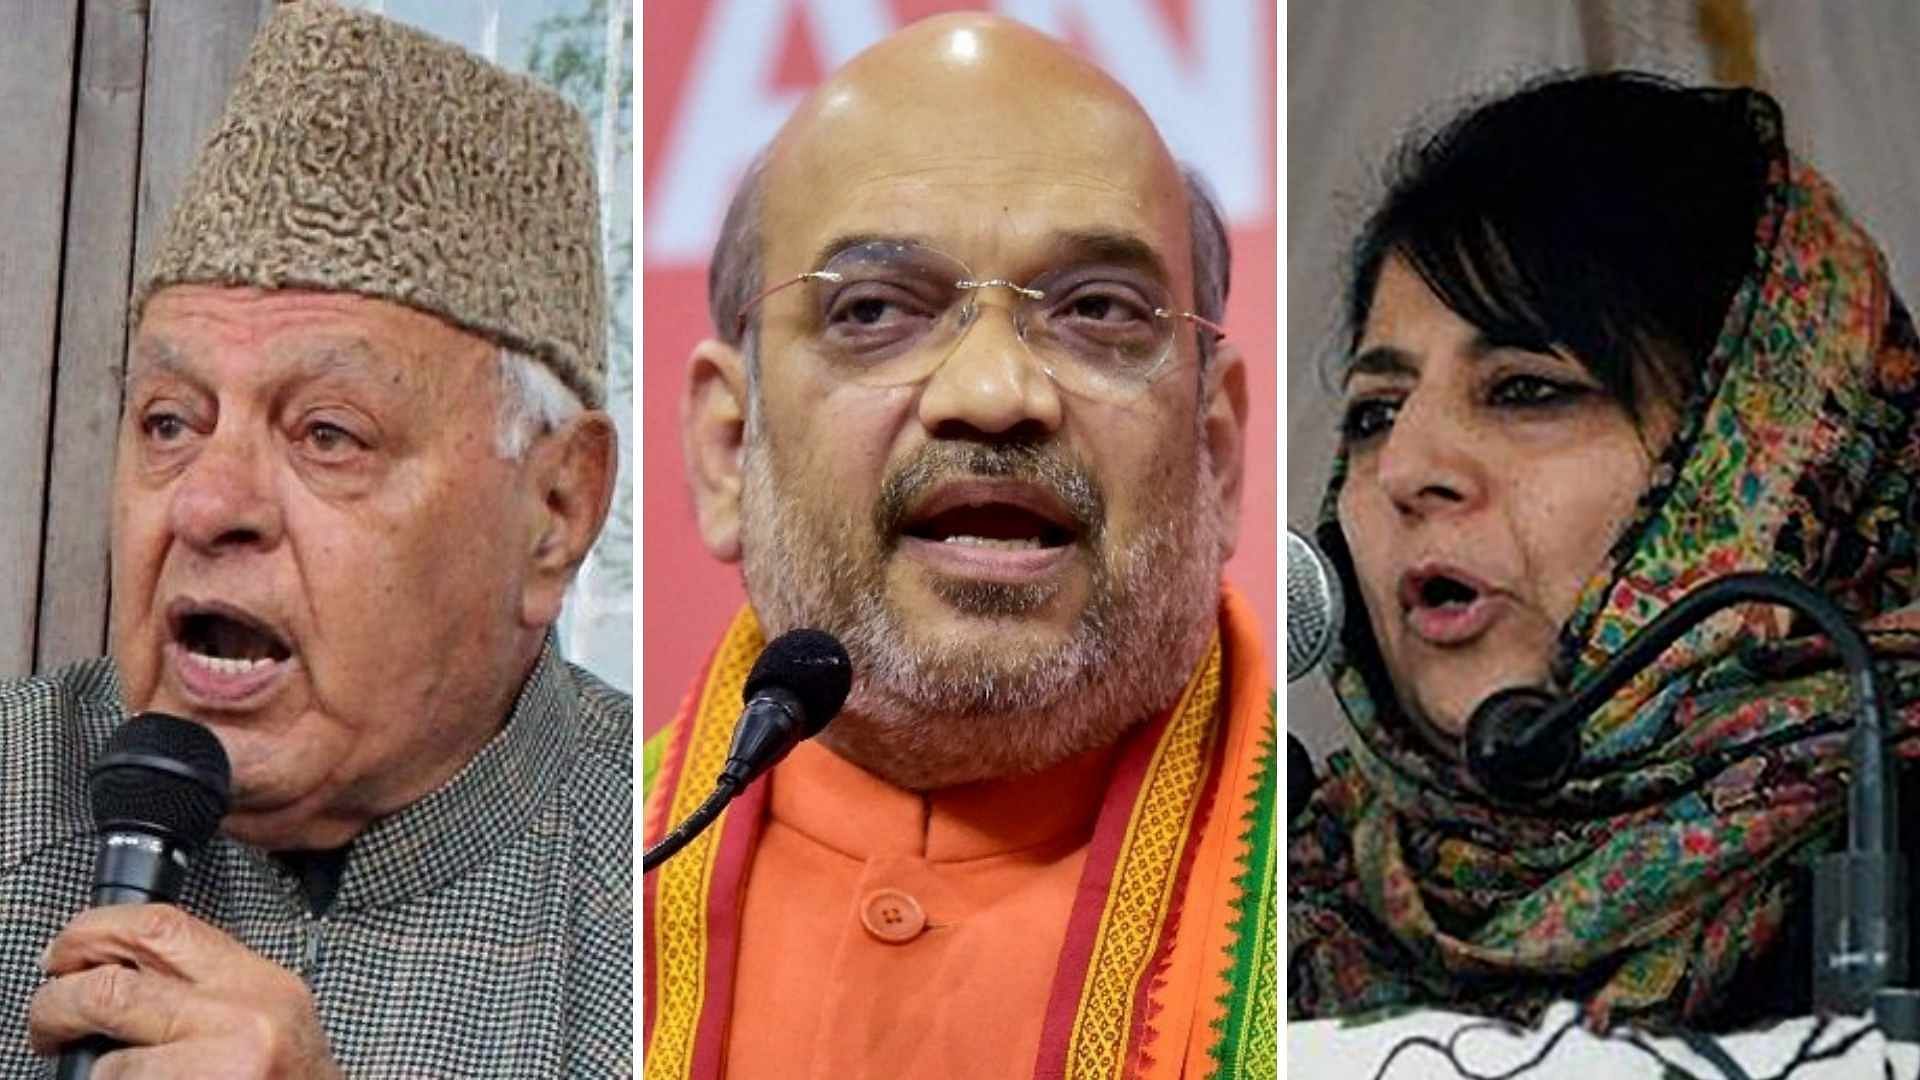 “Congress and the Gupkar Gang want to take J&amp;K back to the era of terror and turmoil,” Amit Shah tweeted.